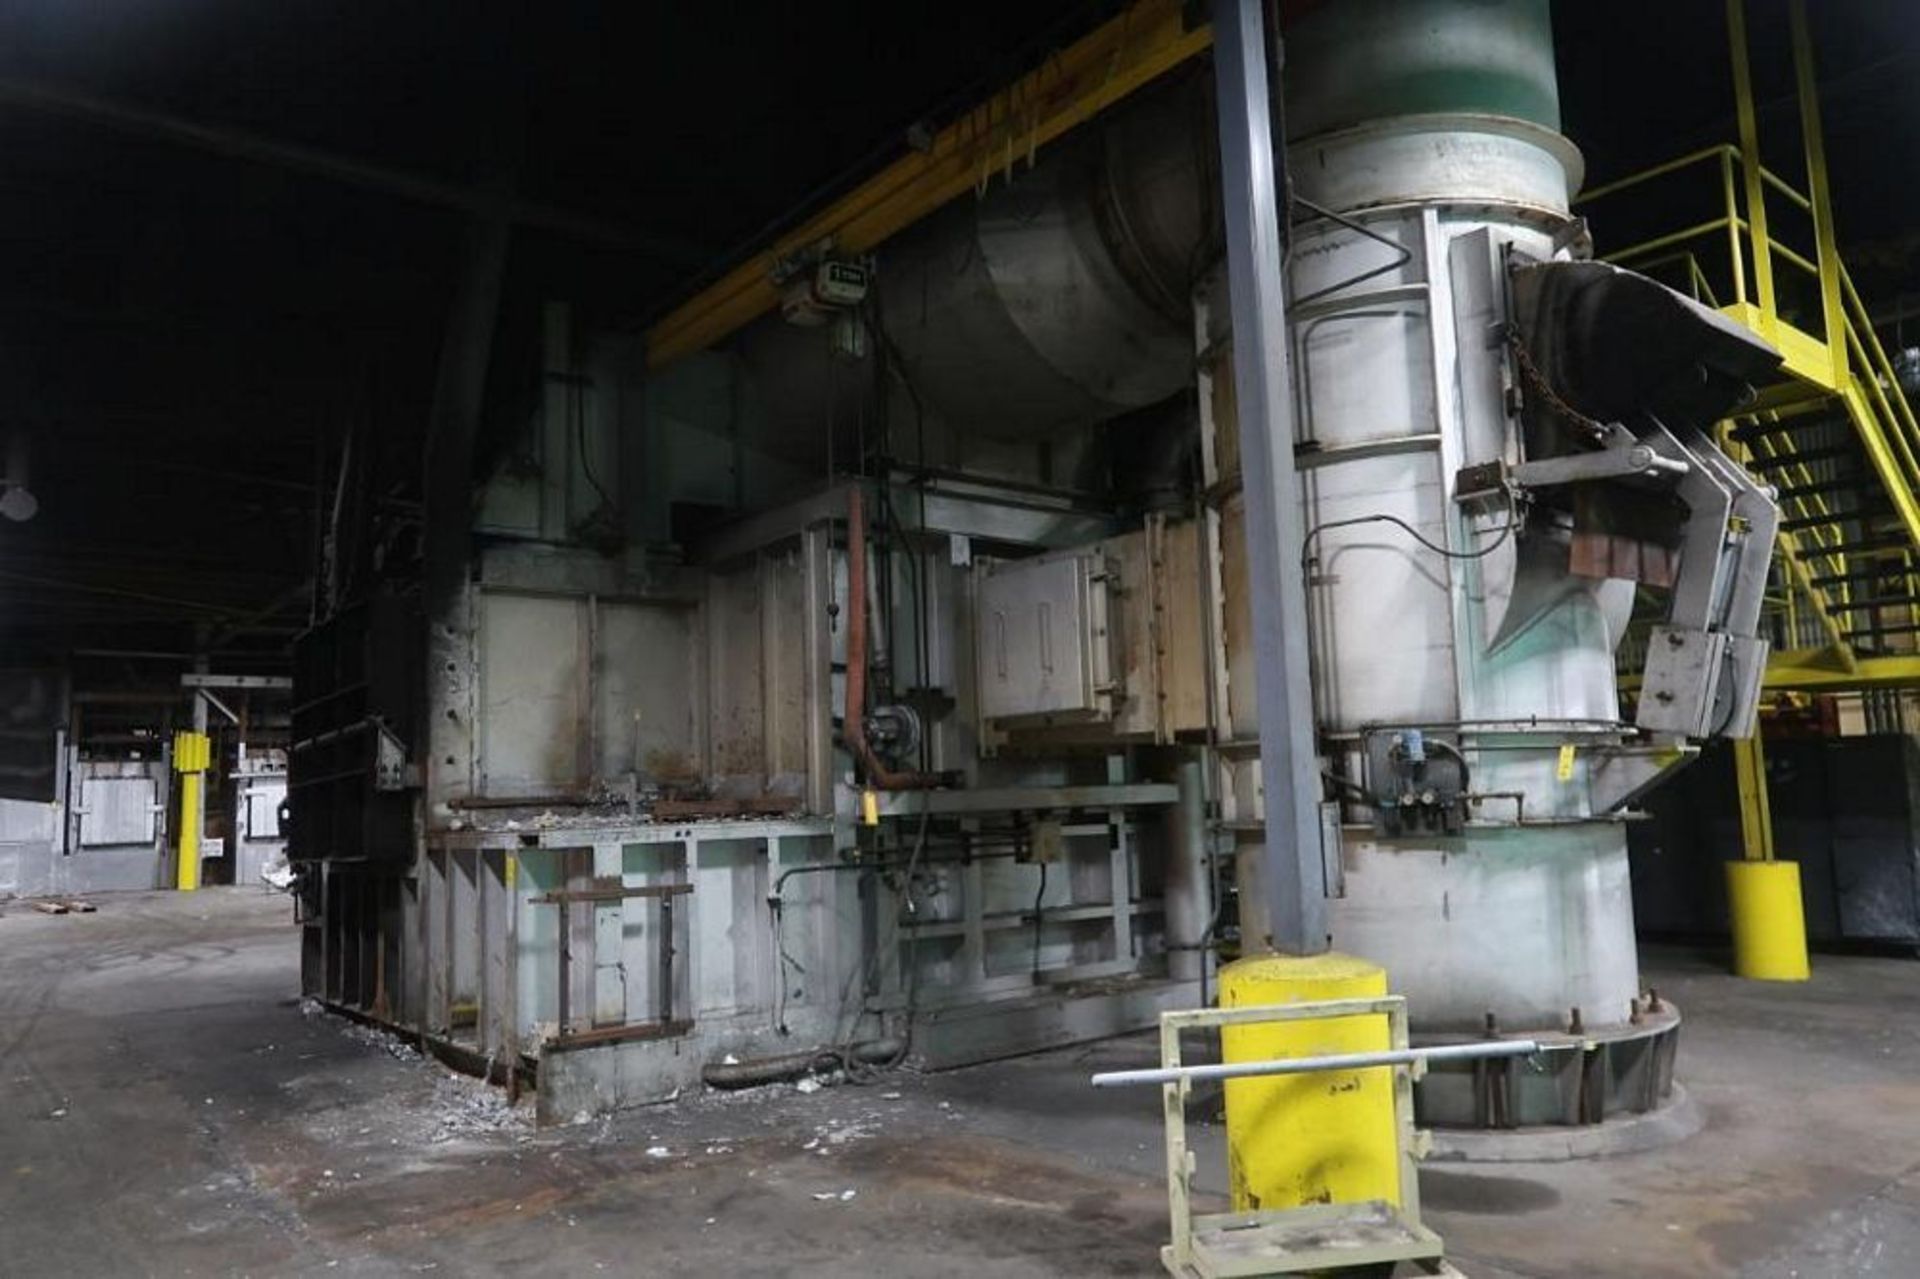 LOT: GNA Alutech 70,000 lb. Gas/Oil Fired Reverberatory Furnace (2002), with Allen Bradley PanelView